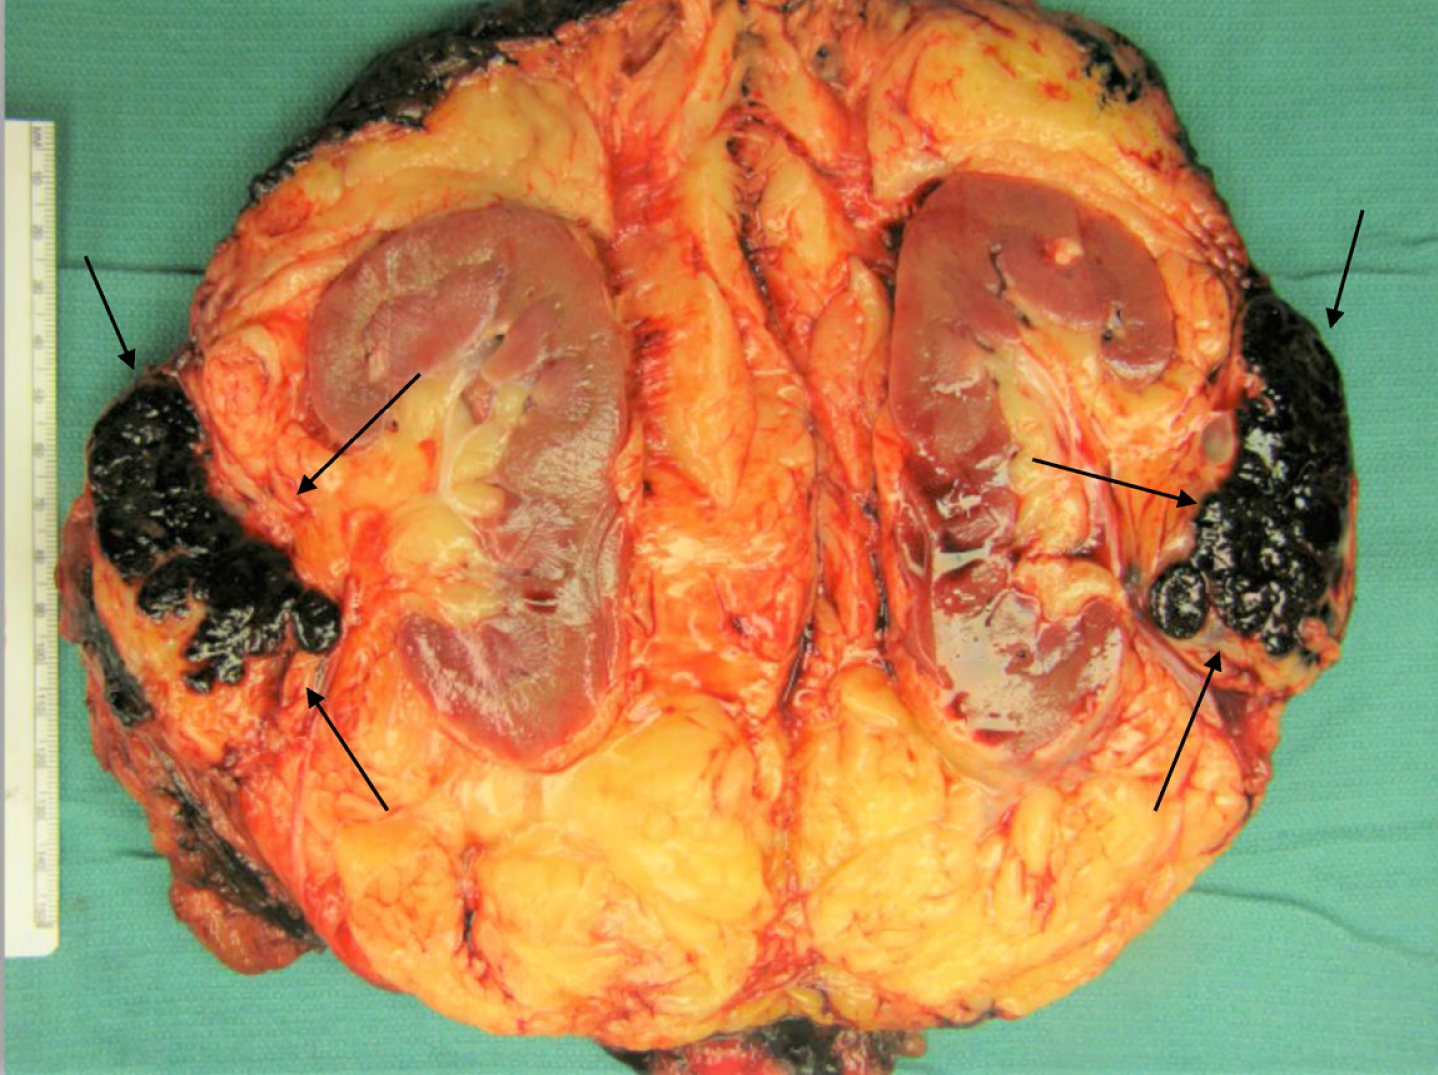 Gross photograph of the renal tumor (black arrows) demonstrating its location within the renal hilar soft tissue, outside the renal parenchyma. Examination of the specimen demonstrated no involvement the kidney, which was otherwise unremarkable. Multiple sections to demonstrate the relationship of tumor to renal parenchyma were submitted and confirmed the carcinoma did not involve the renal parenchyma.